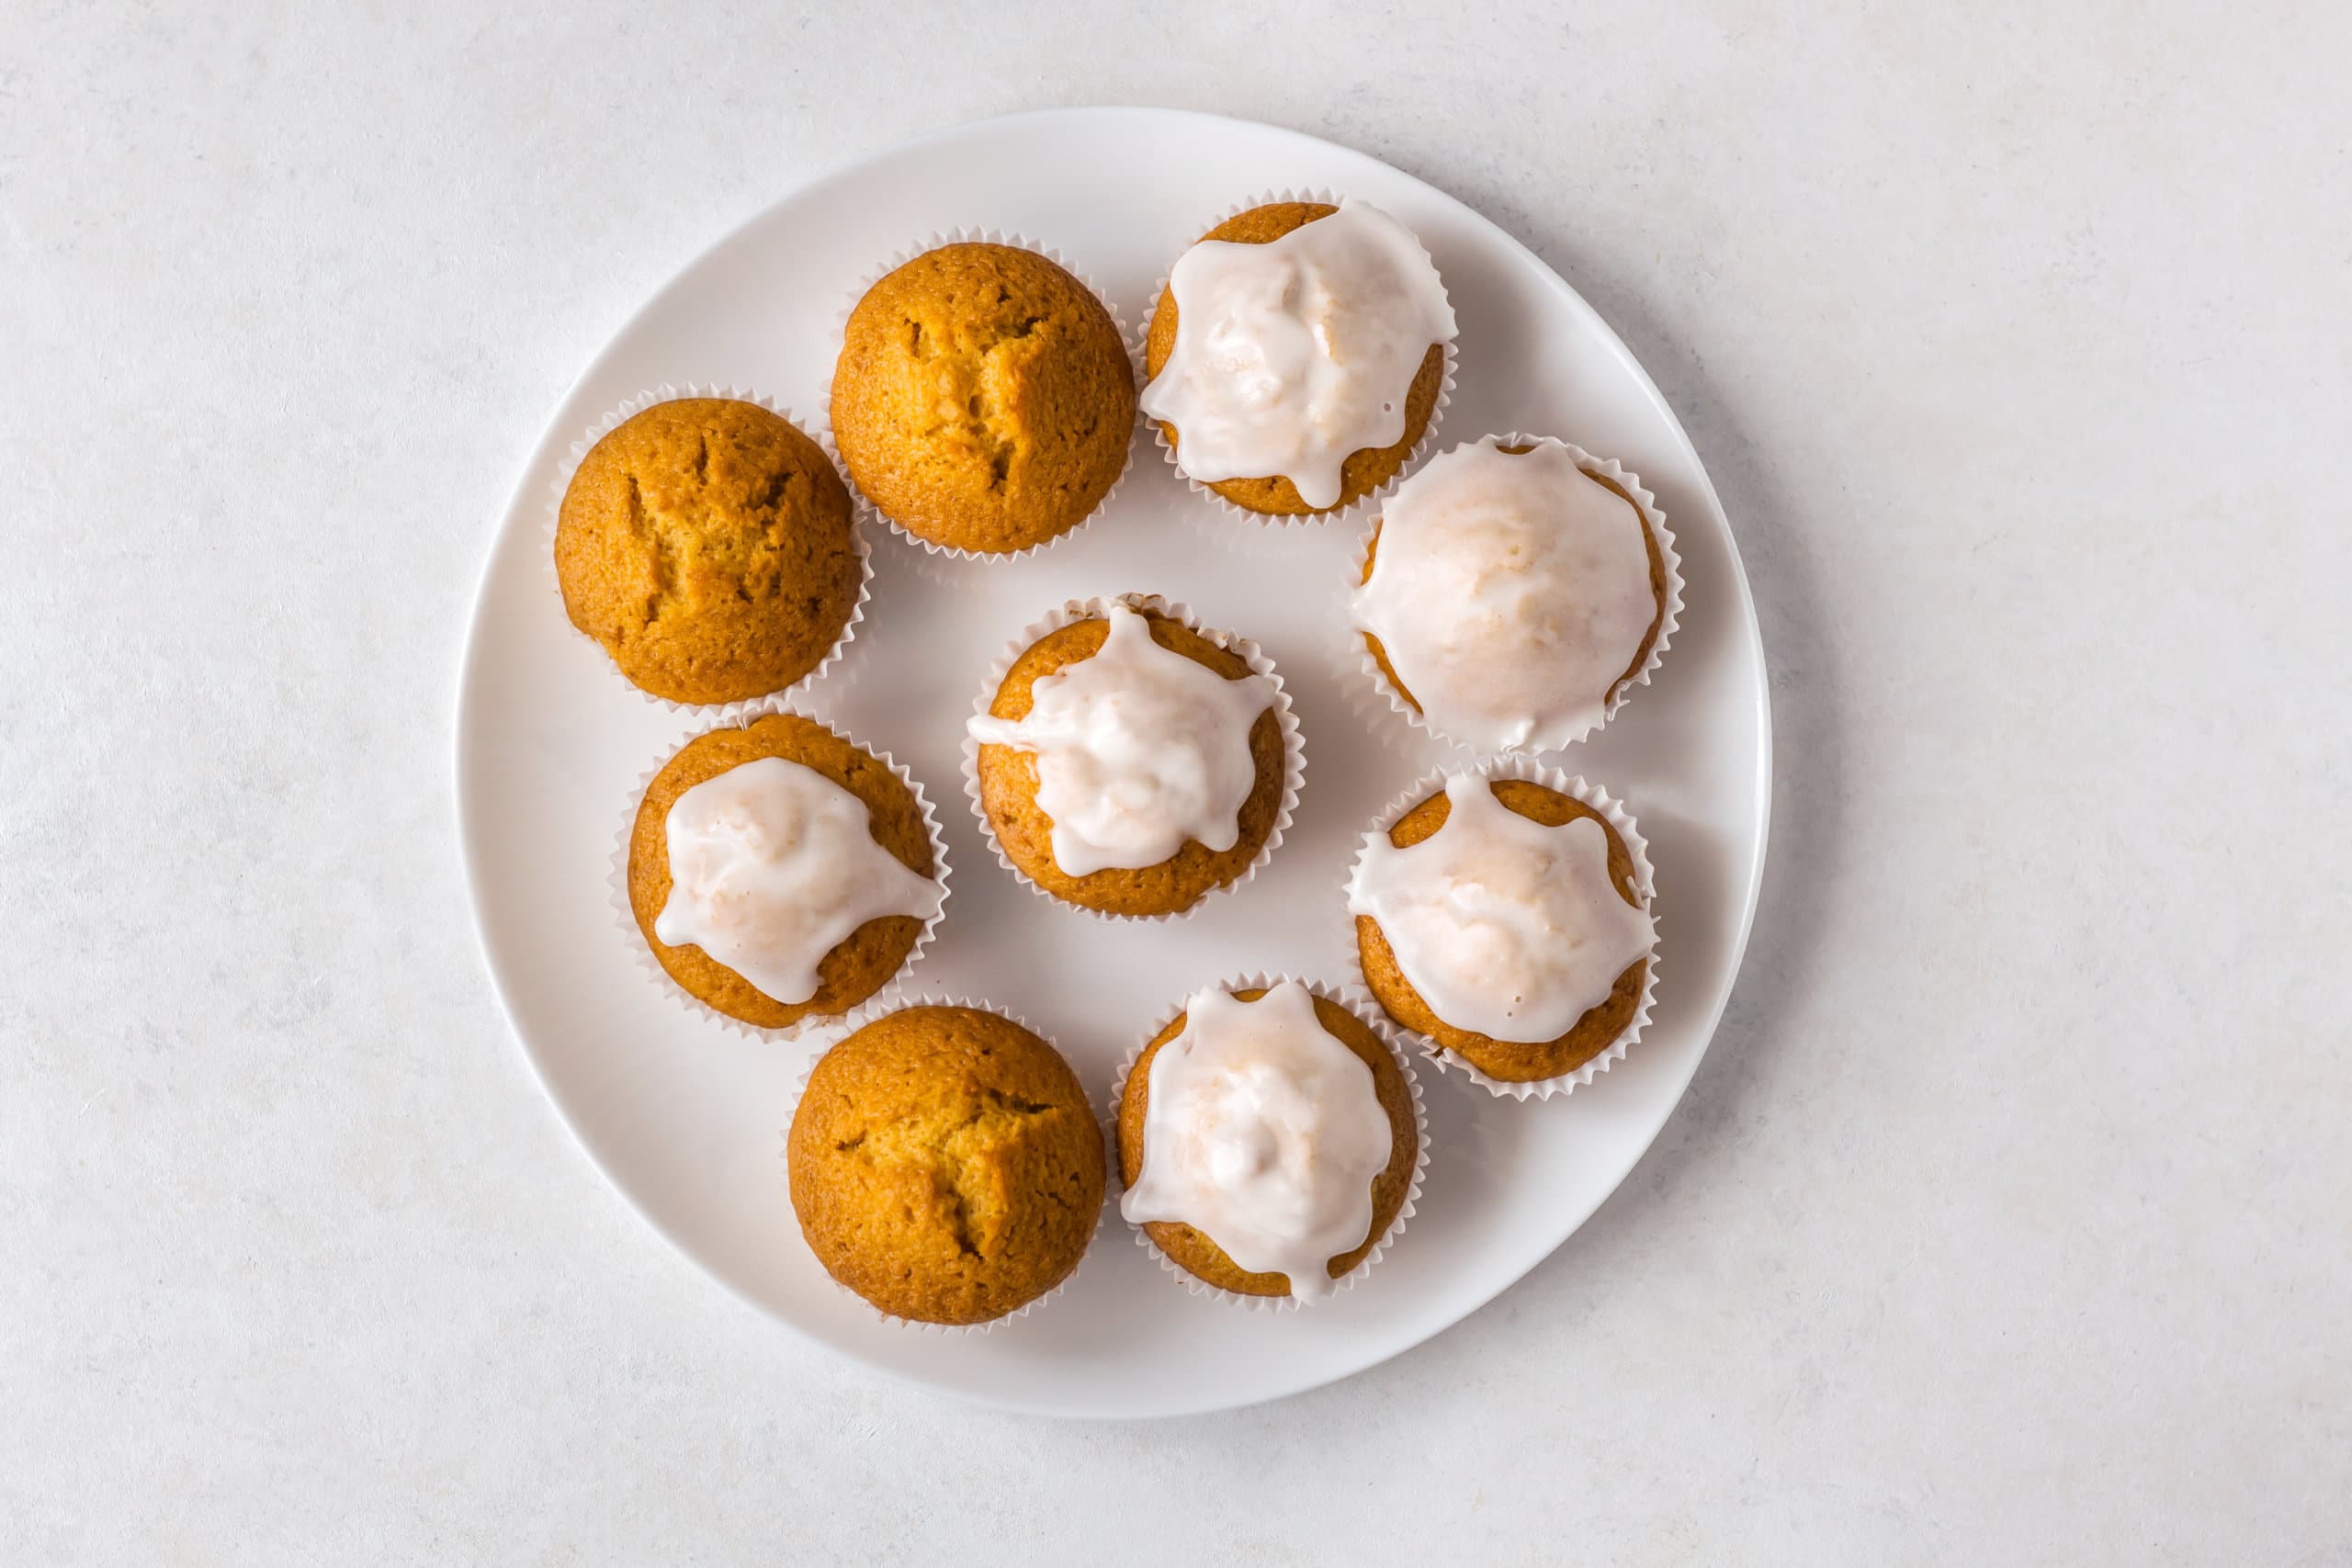 pumpkin muffins, some glazed, on a white plate